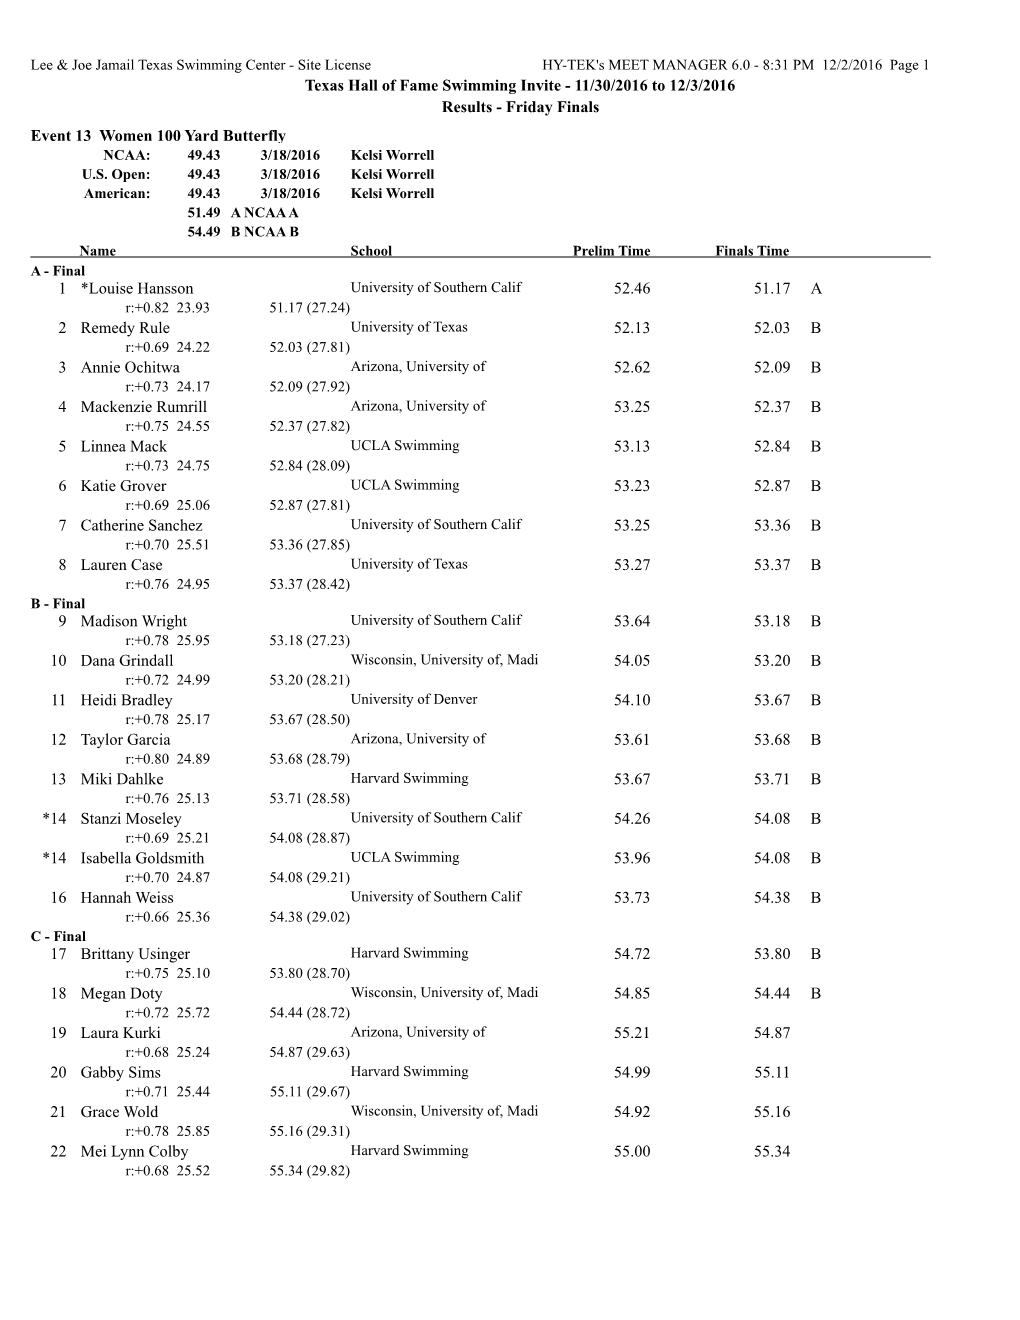 Texas Hall of Fame Swimming Invite - 11/30/2016 to 12/3/2016 Results - Friday Finals